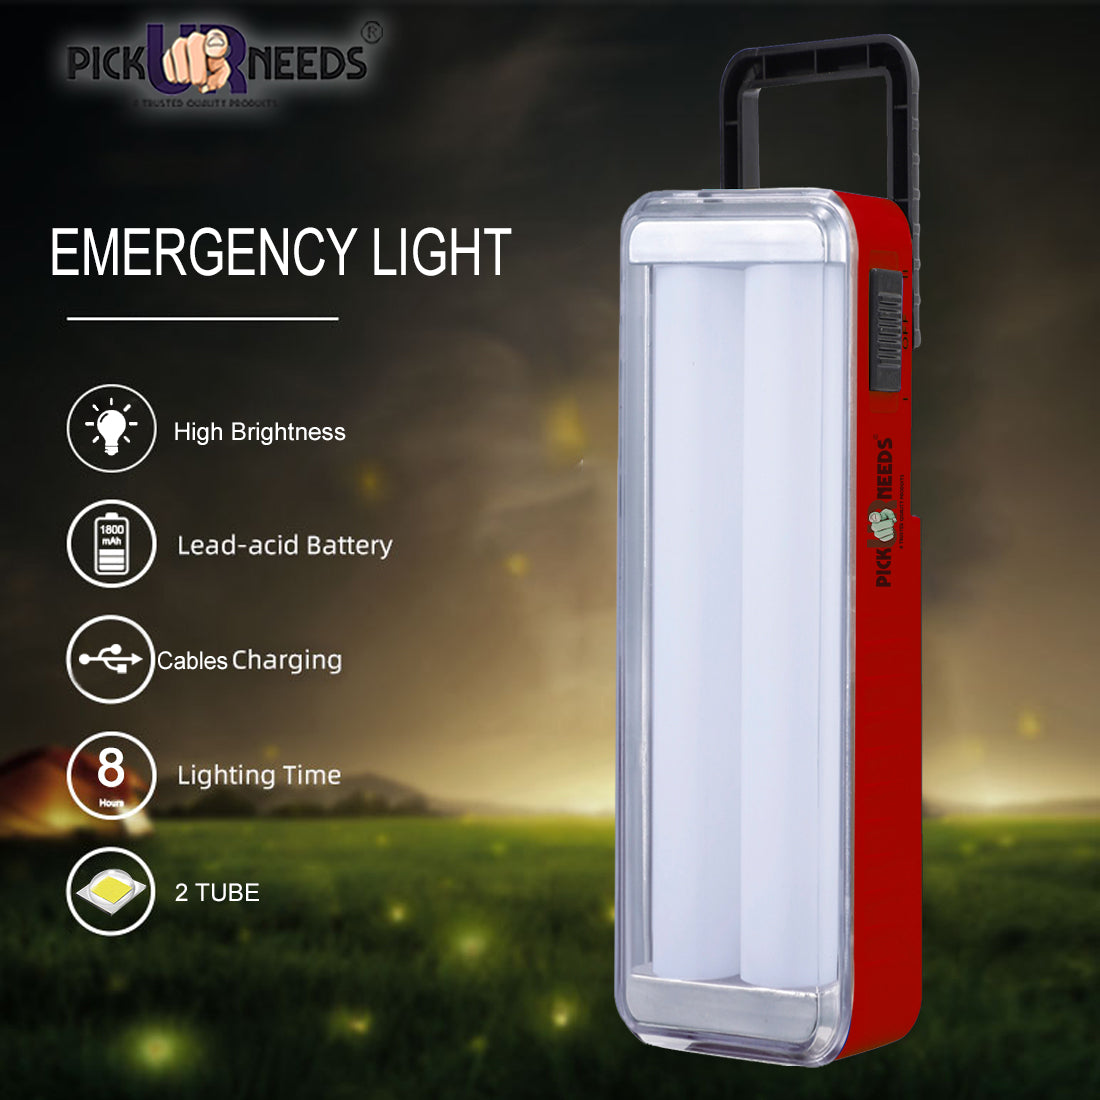 Pick Ur Needs High Quality 60 LED TUBE High-Bright Rechargeable Light With 7 hrs Emergency Light